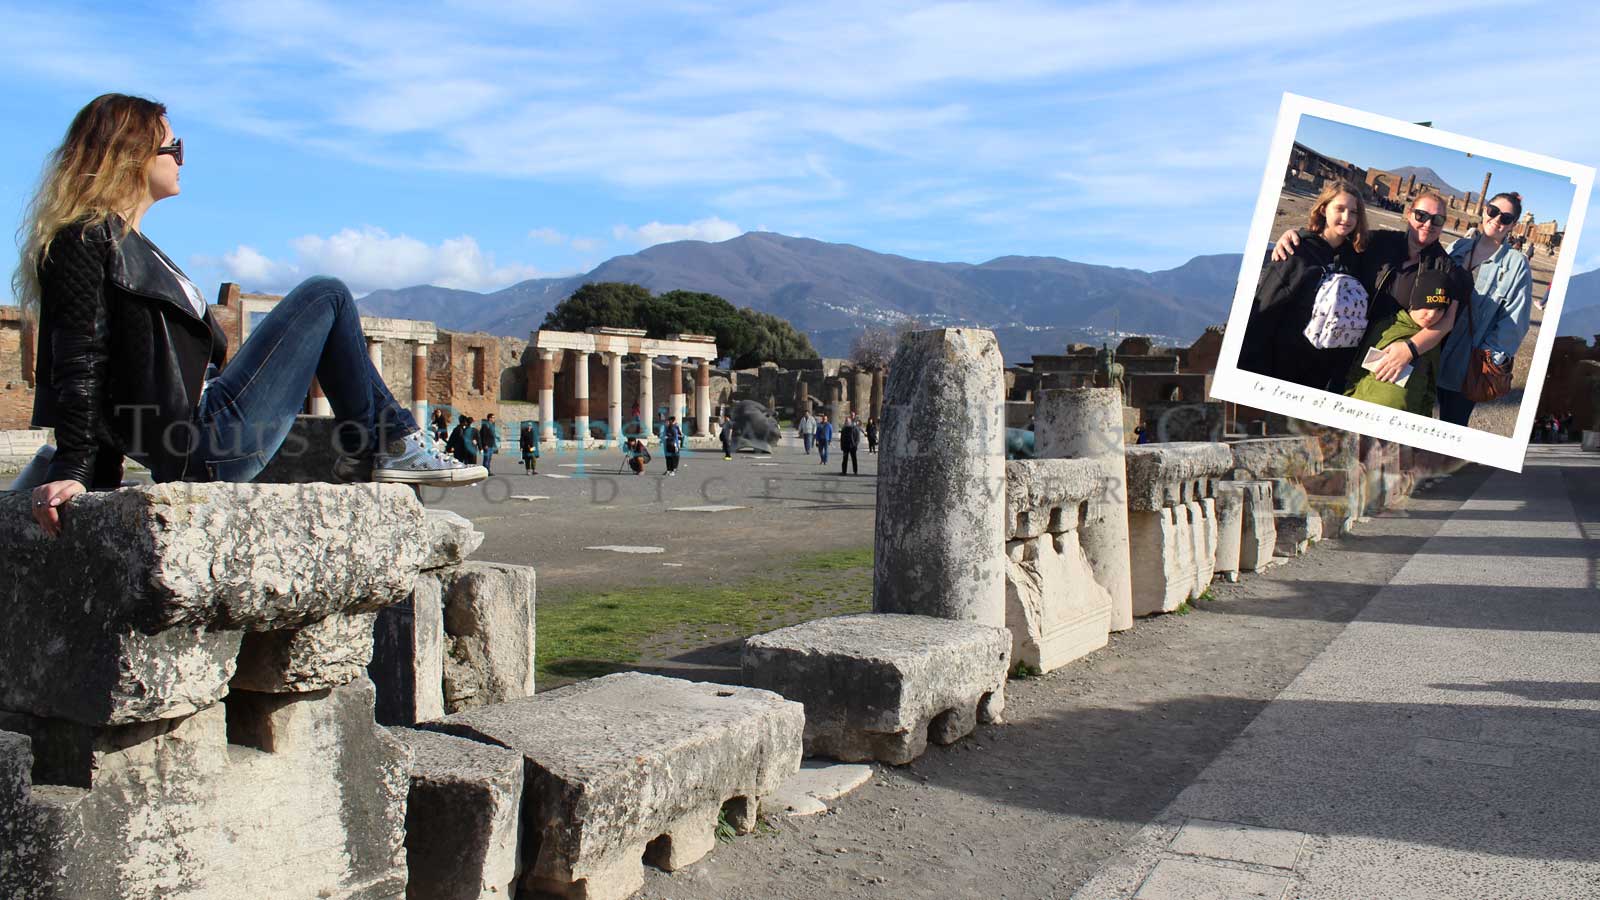 Guided tour of Pompeii - Visit Pompeii with our excellent local guides1600 x 900